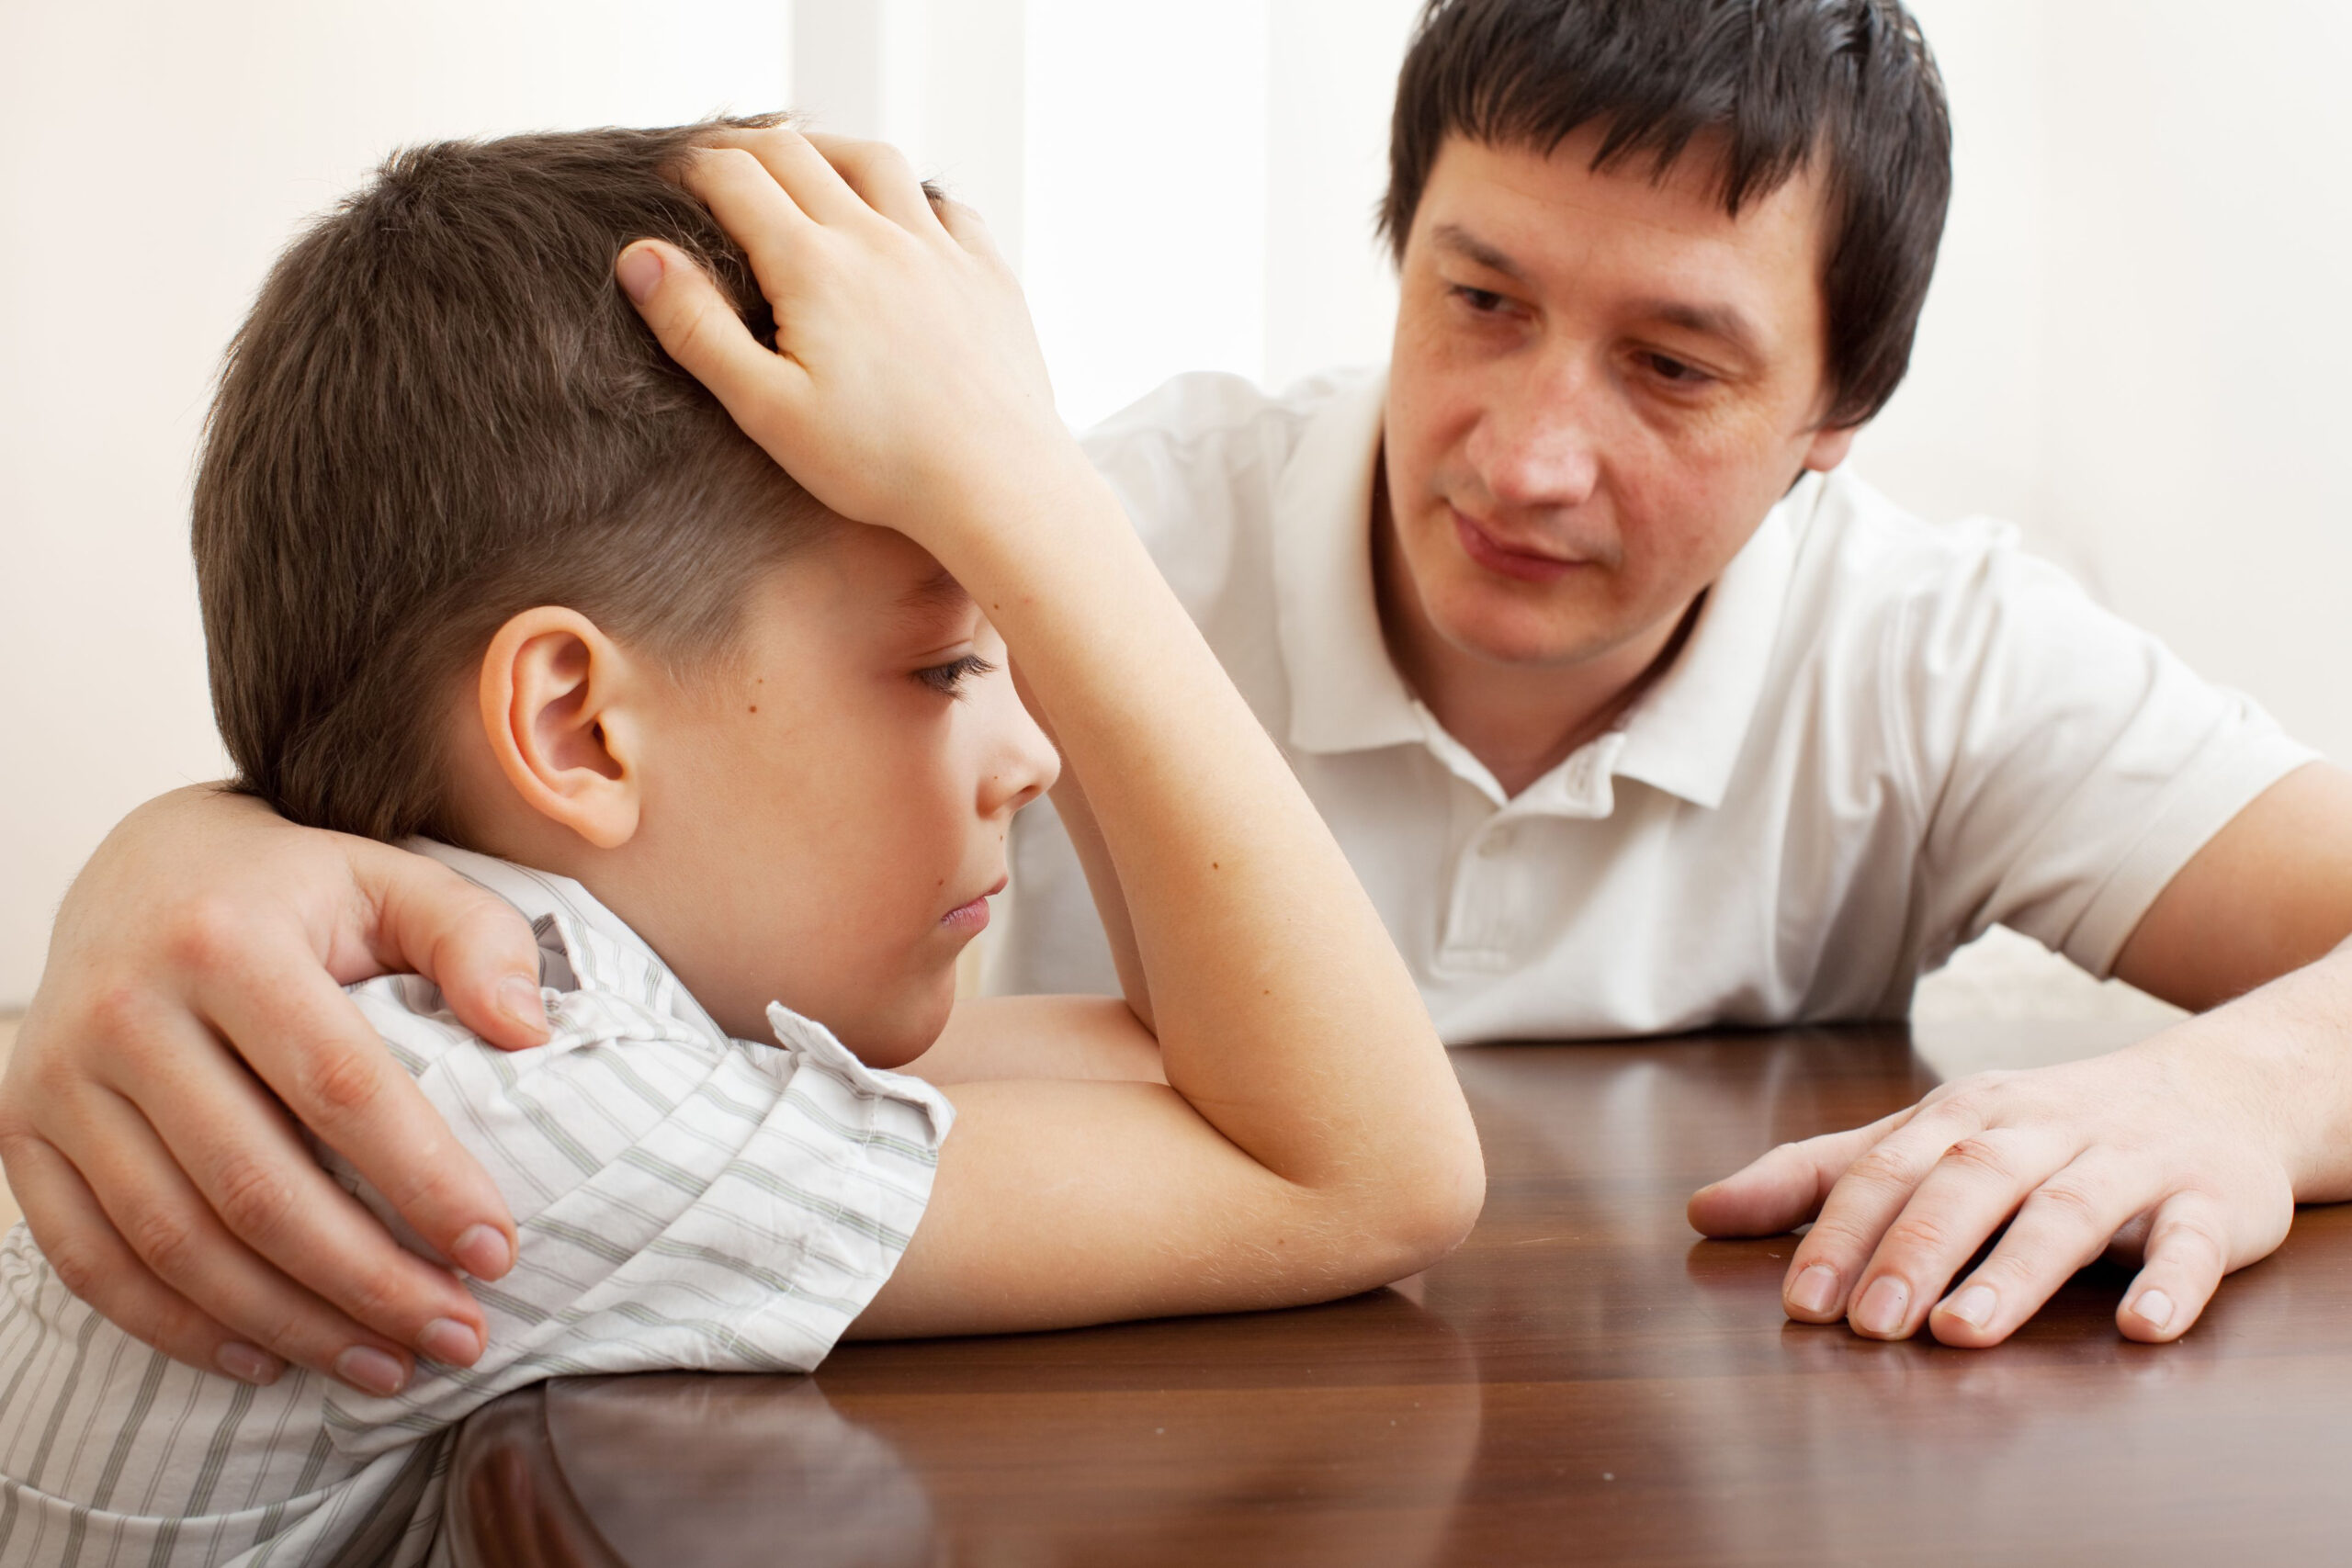 Does My Child Need To Be In Therapy?